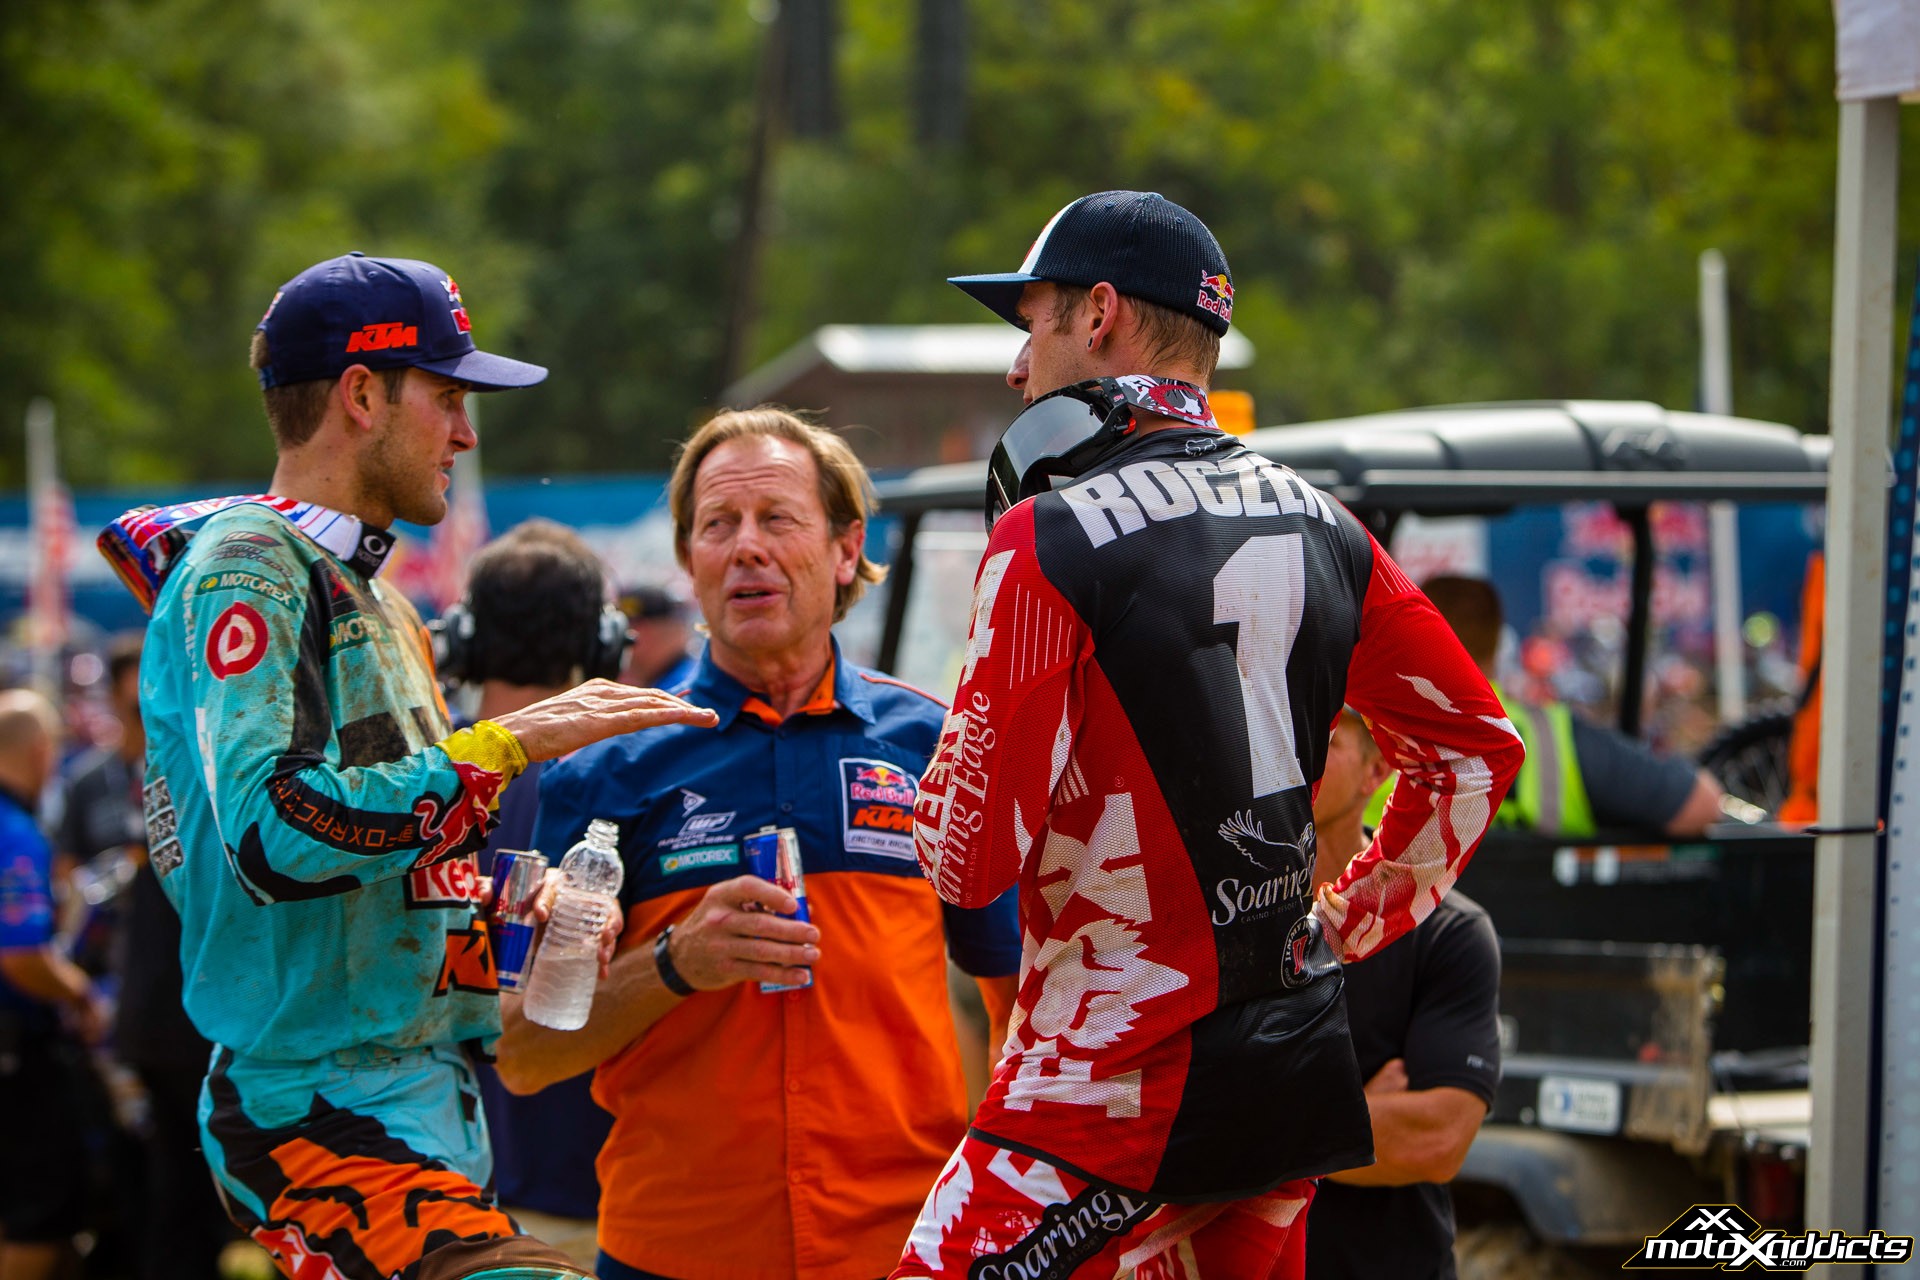 We will never know what could of been if Ken stayed with Ryan Dungey and Roger Decoster under the Red Bull/KTM tent. Photo by: Hoppenworld